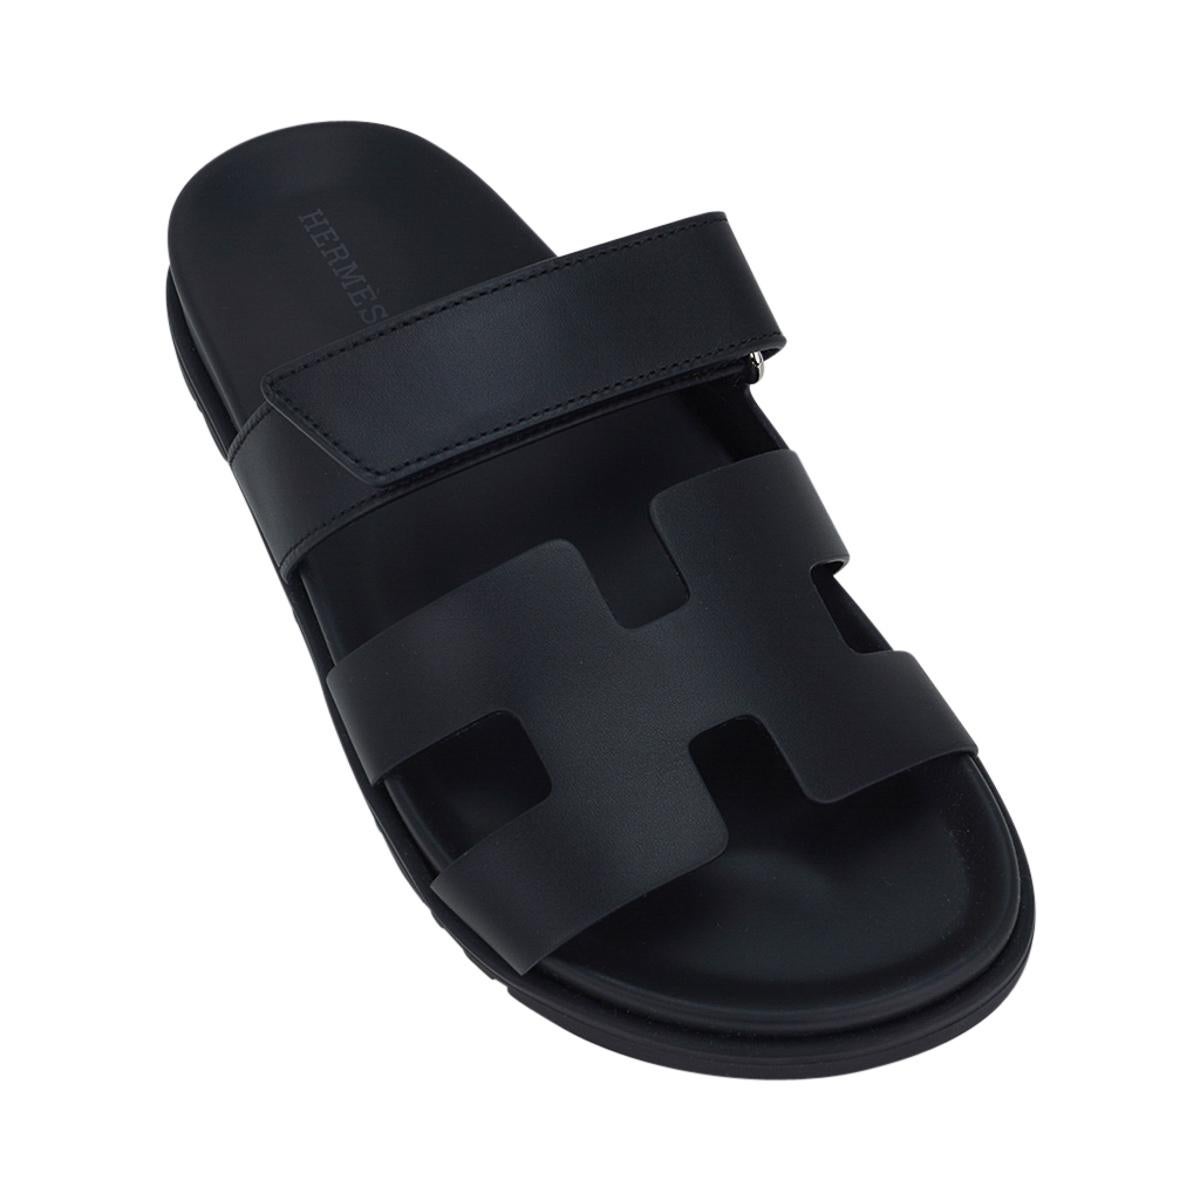 Hermes Chypre Black Calfskin Sandal 37 / 7 In New Condition For Sale In Miami, FL